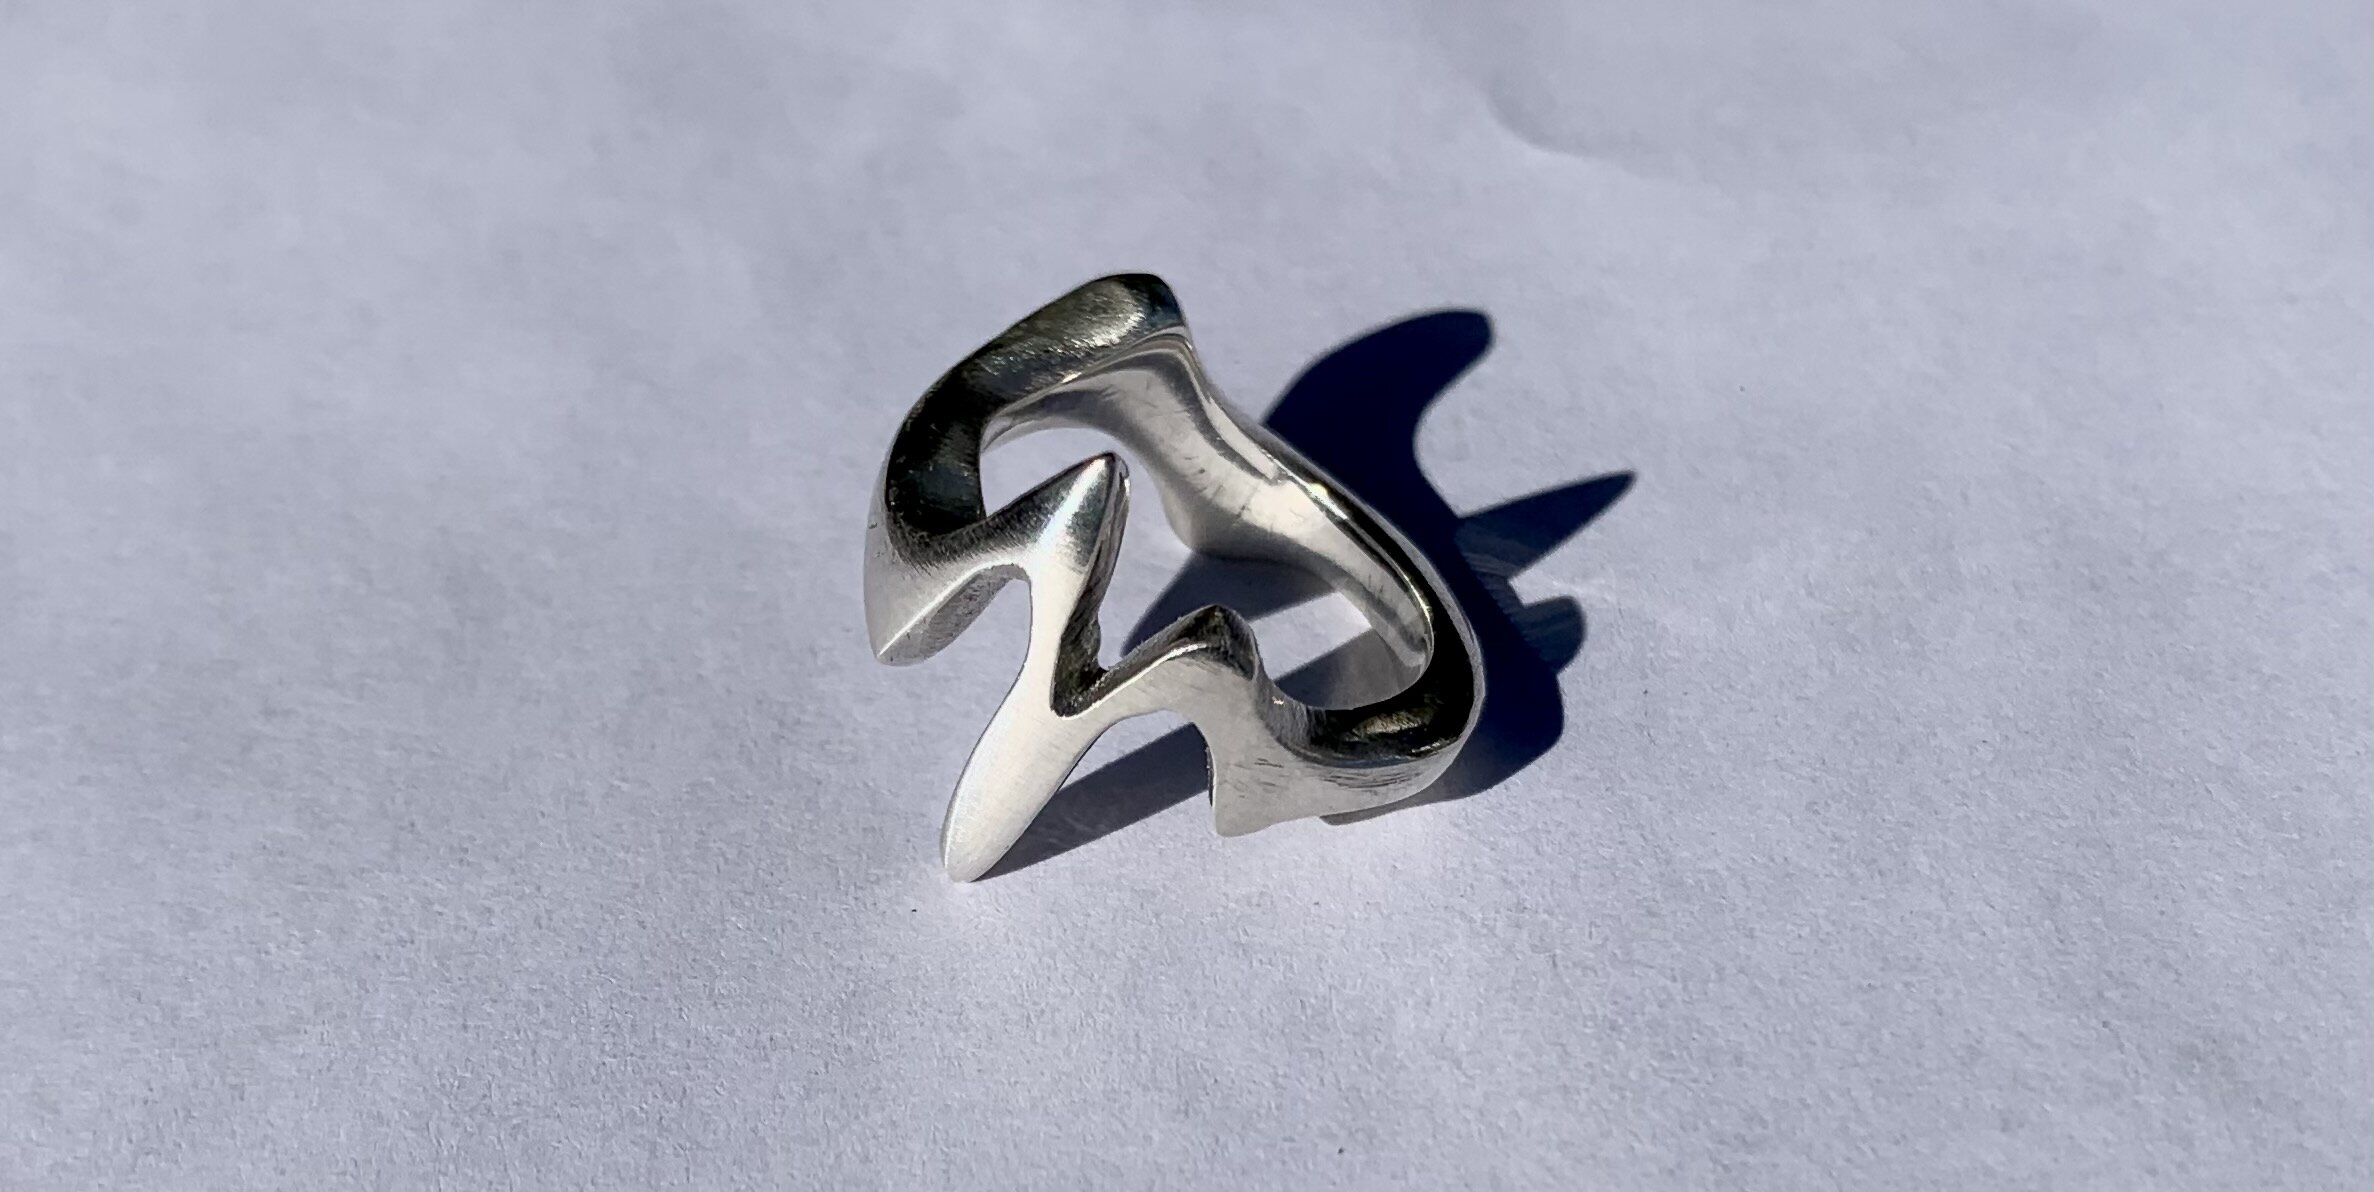  This ring was made as a gift for my mother. There’s a saying in Mandarin that a mother’s blood flows through her children, and this ring was meant to capture the spirit of a heartbeat. As a result of quarantine, I have not seen in my parents in over